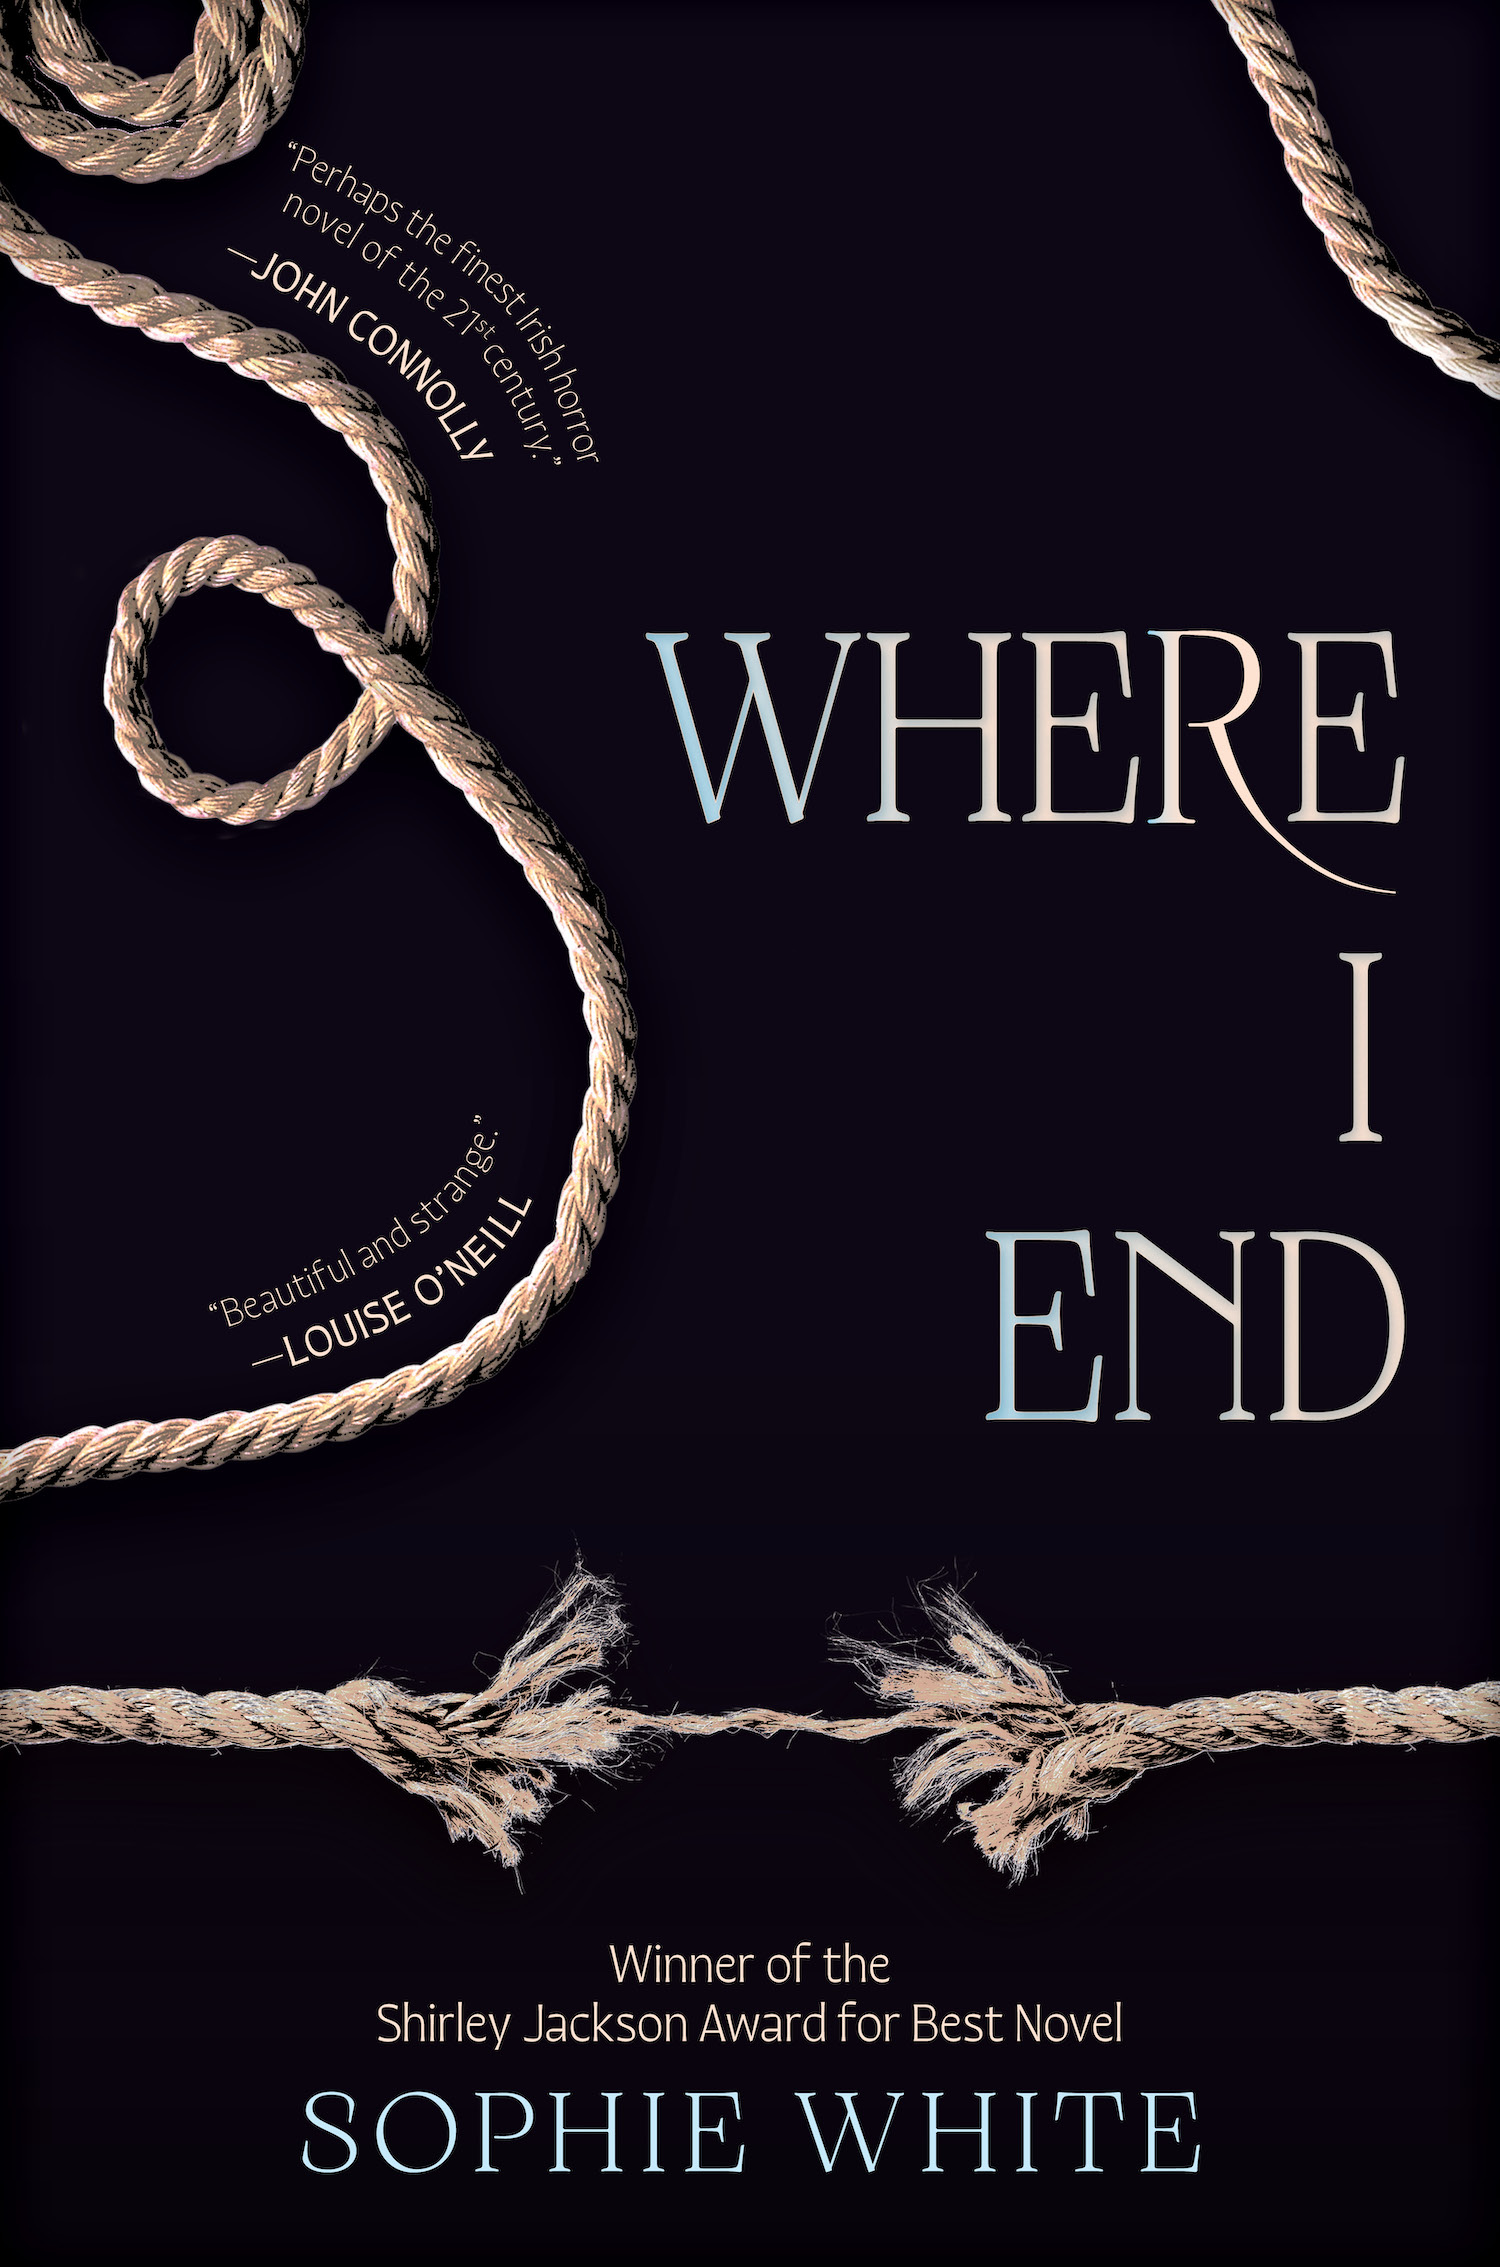 Book cover of Where I End by Sophie White